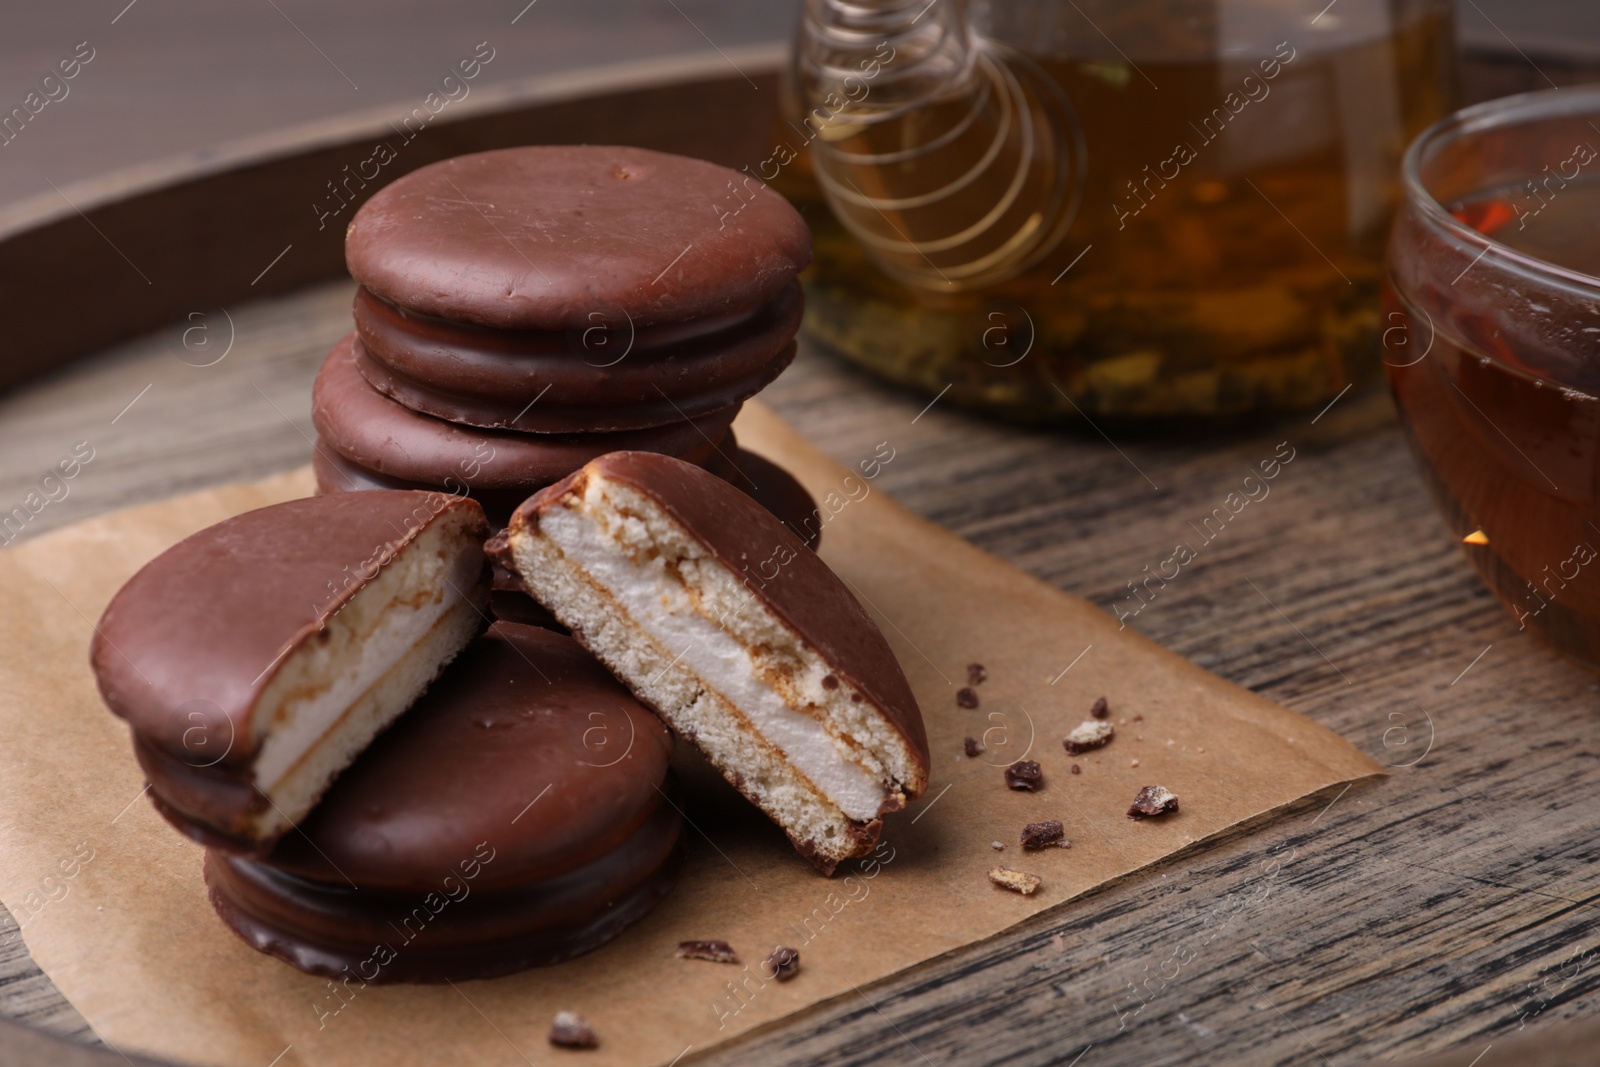 Photo of Tasty choco pies and tea on wooden tray, closeup view